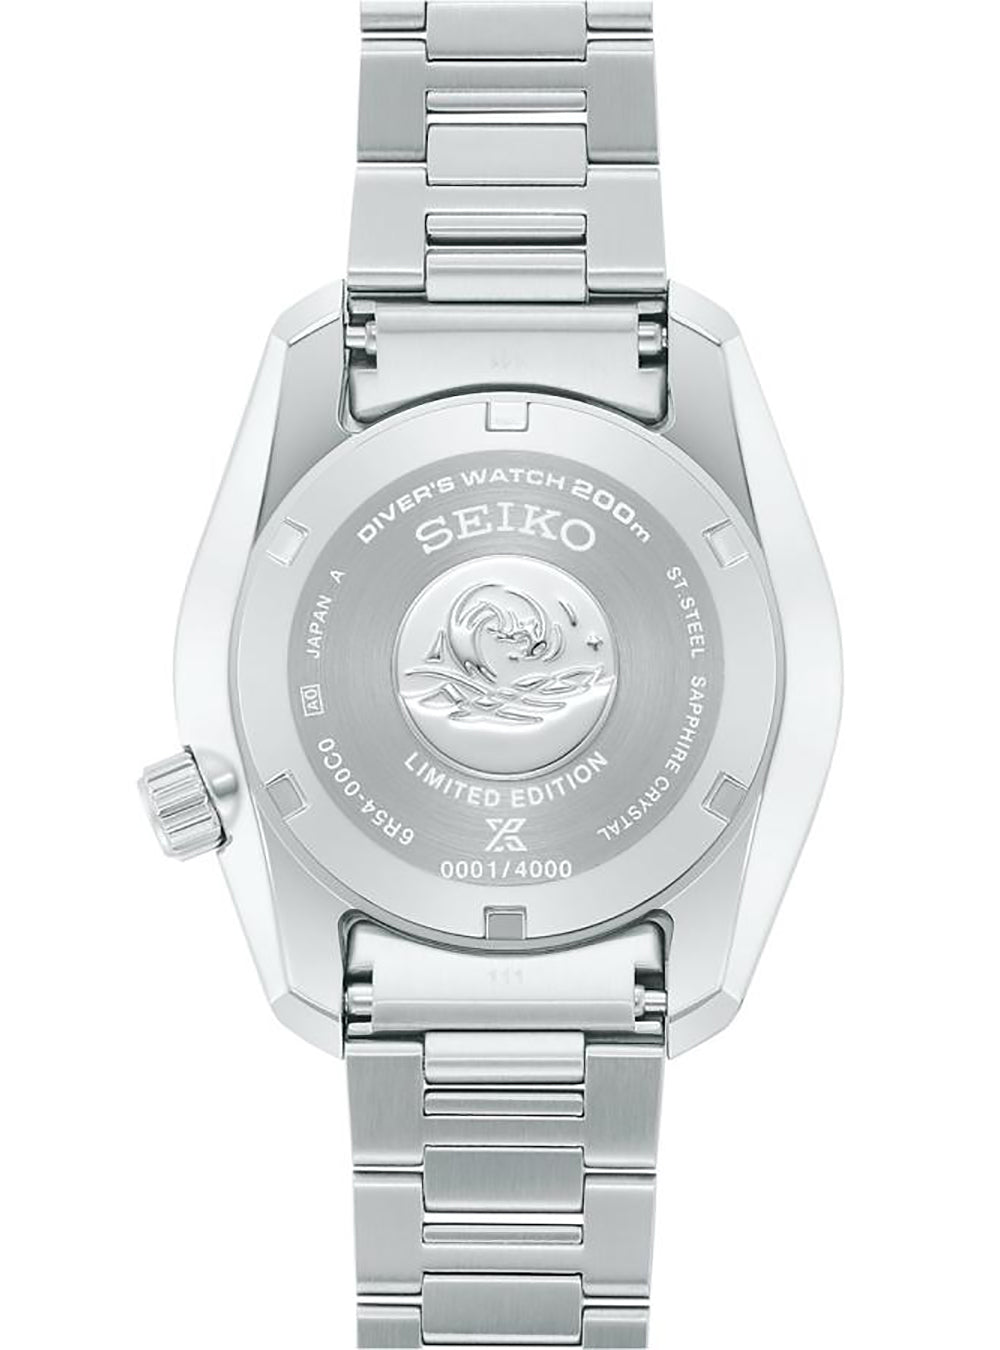 SEIKO WATCHMAKING 110TH ANNIVERSARY SEIKO PROSPEX SAVE THE OCEAN SBEJ013 /  SPB385 LIMITED EDITION MADE IN JAPAN JDM